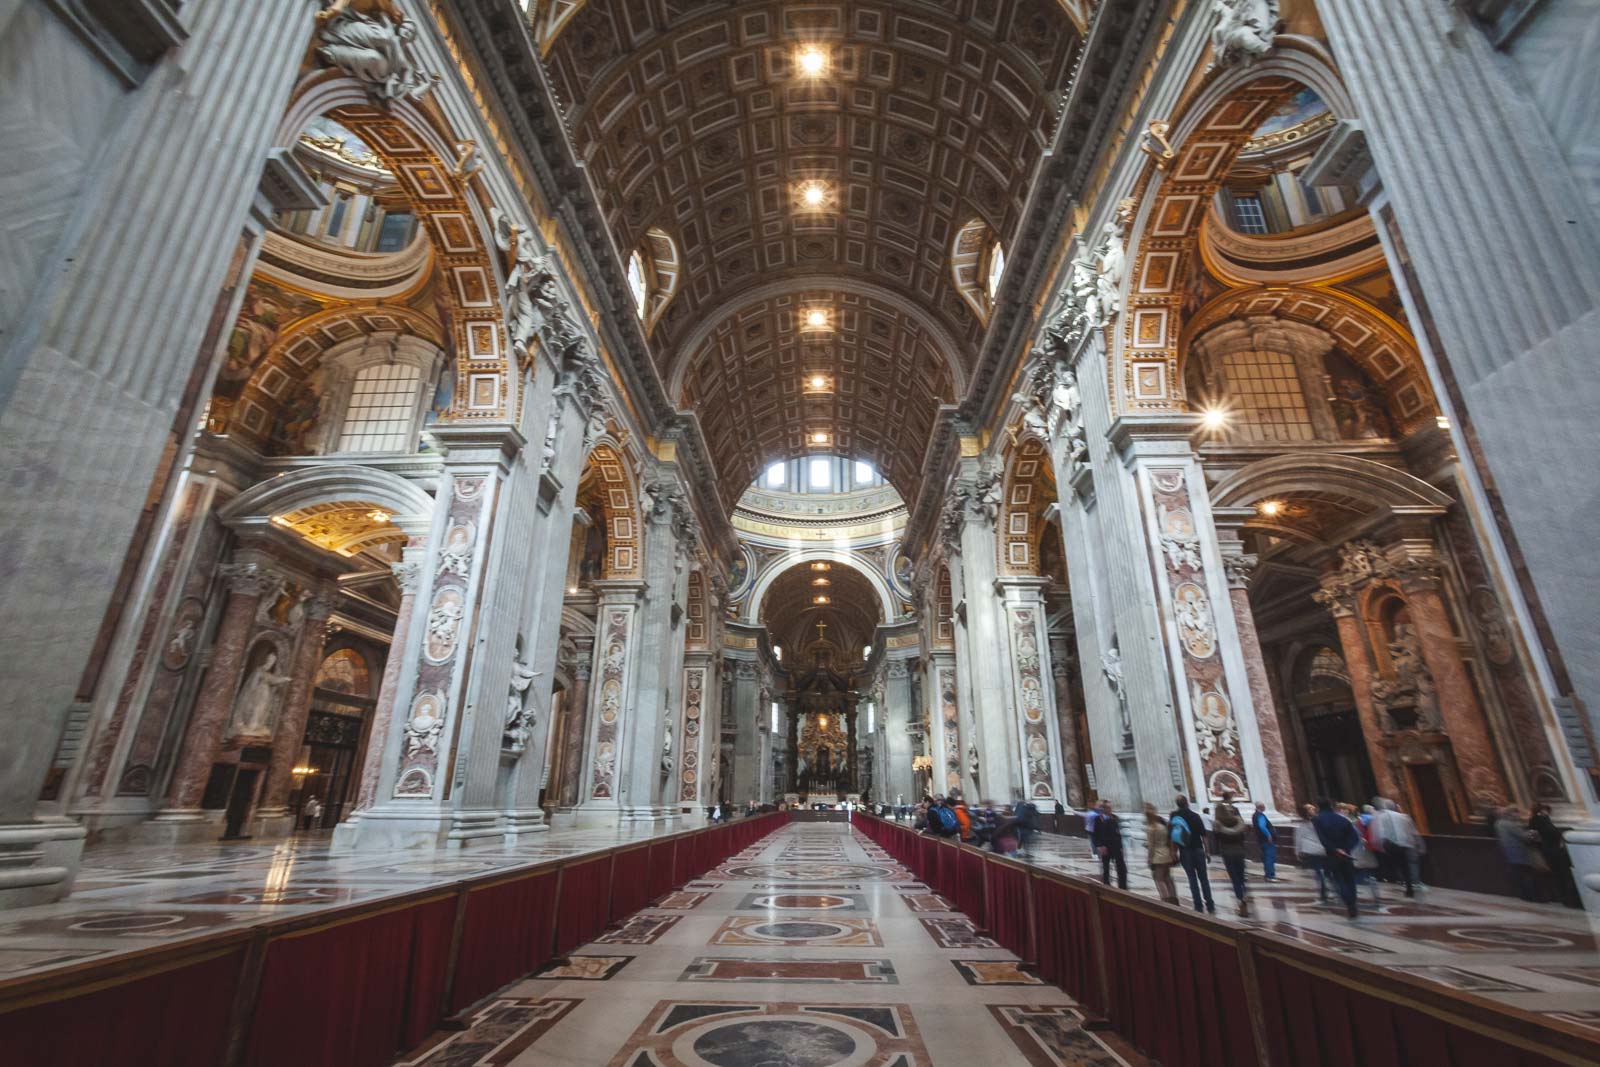 Interestin Rome Fact about St. Peters Basilica